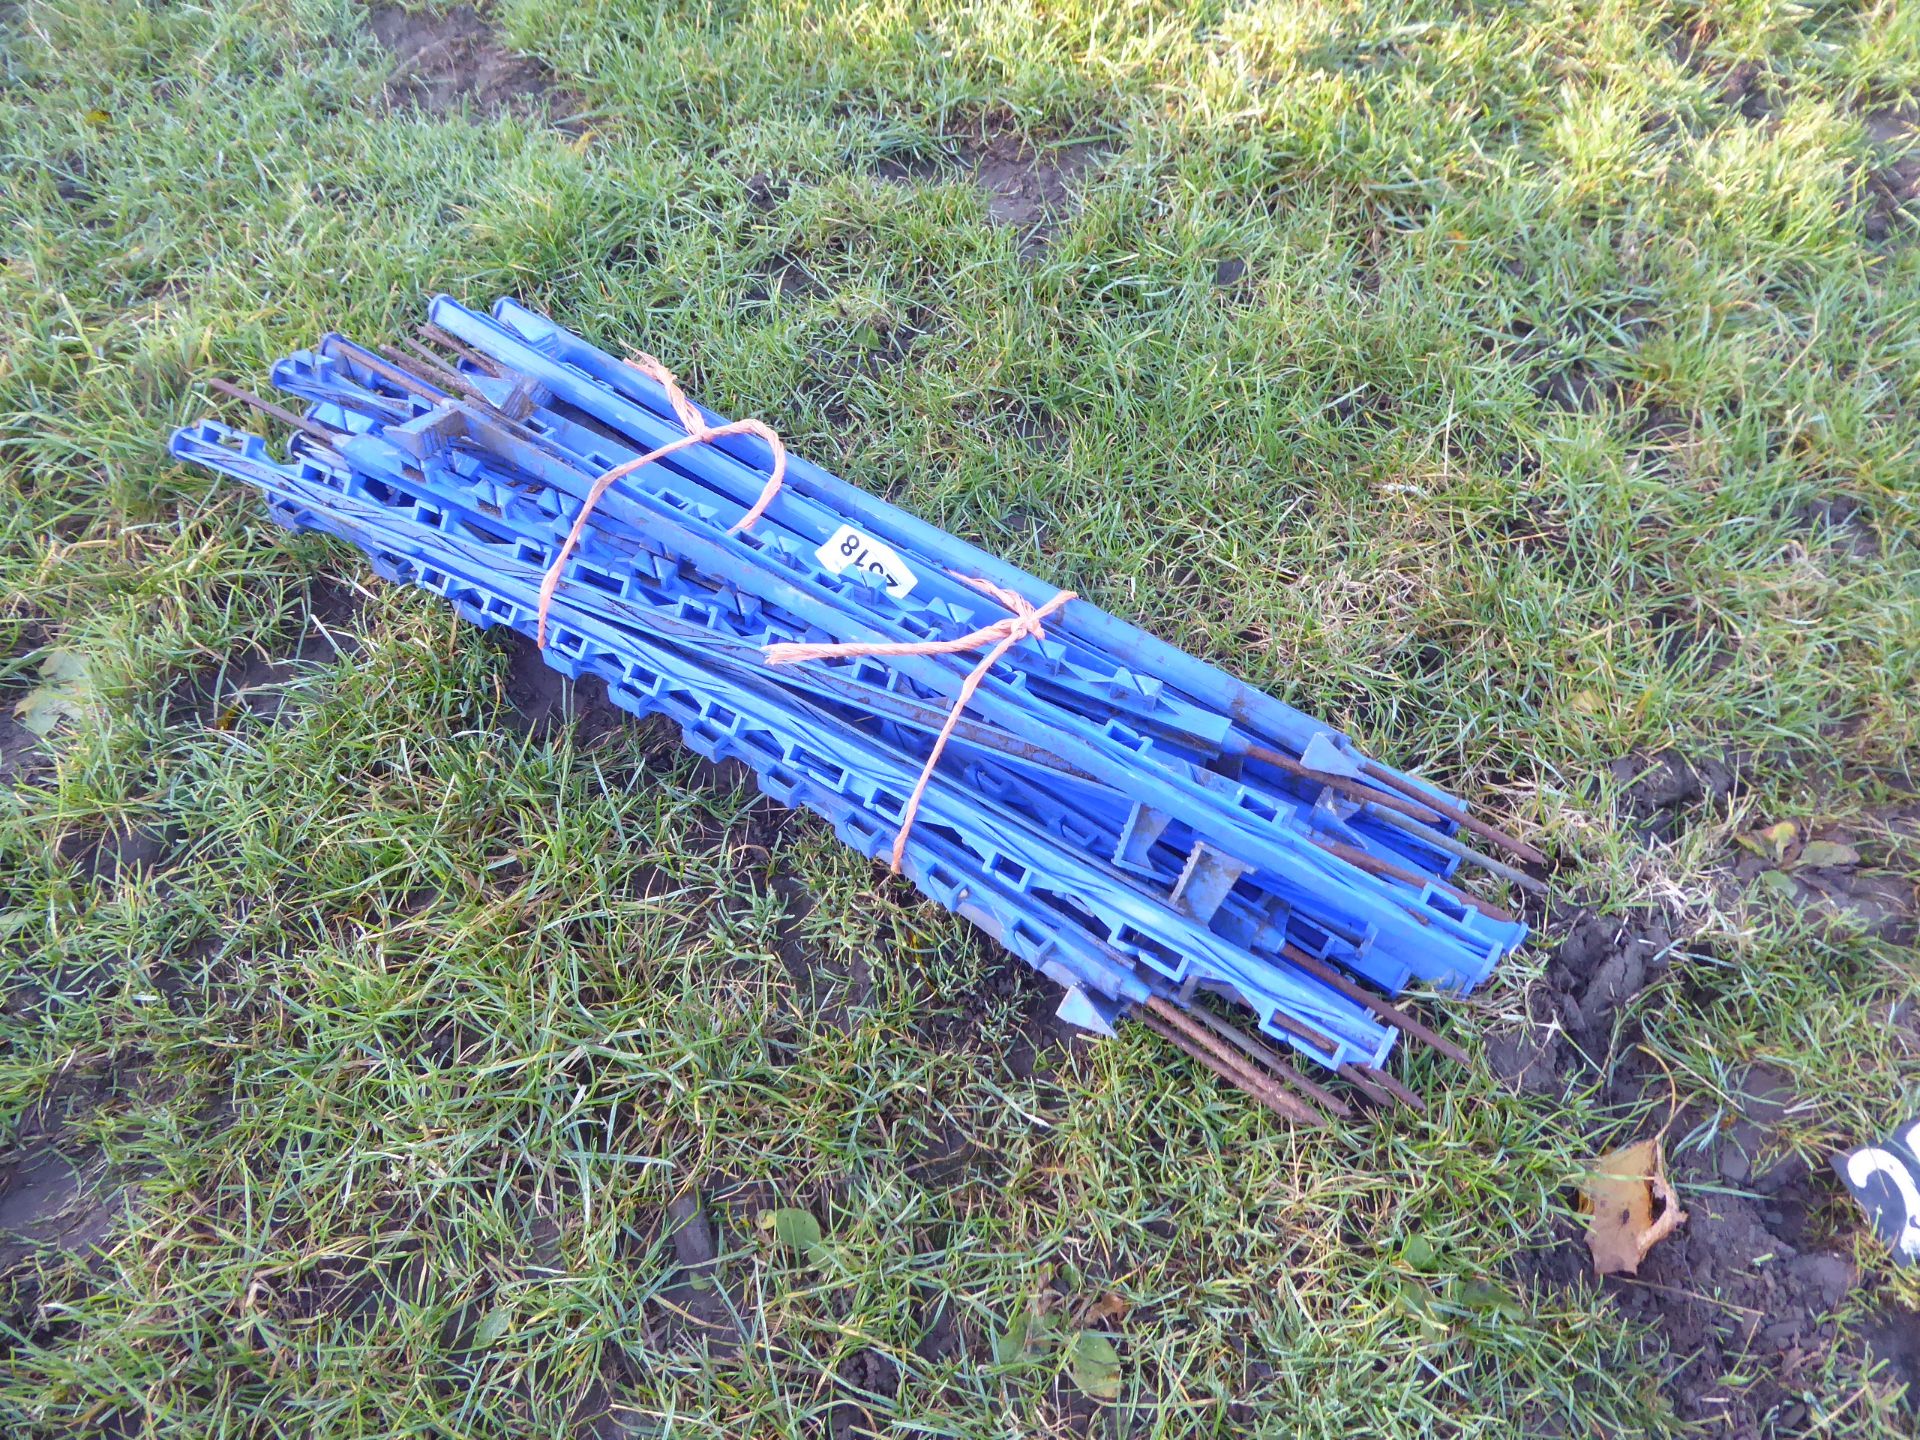 25 electric fencing stakes